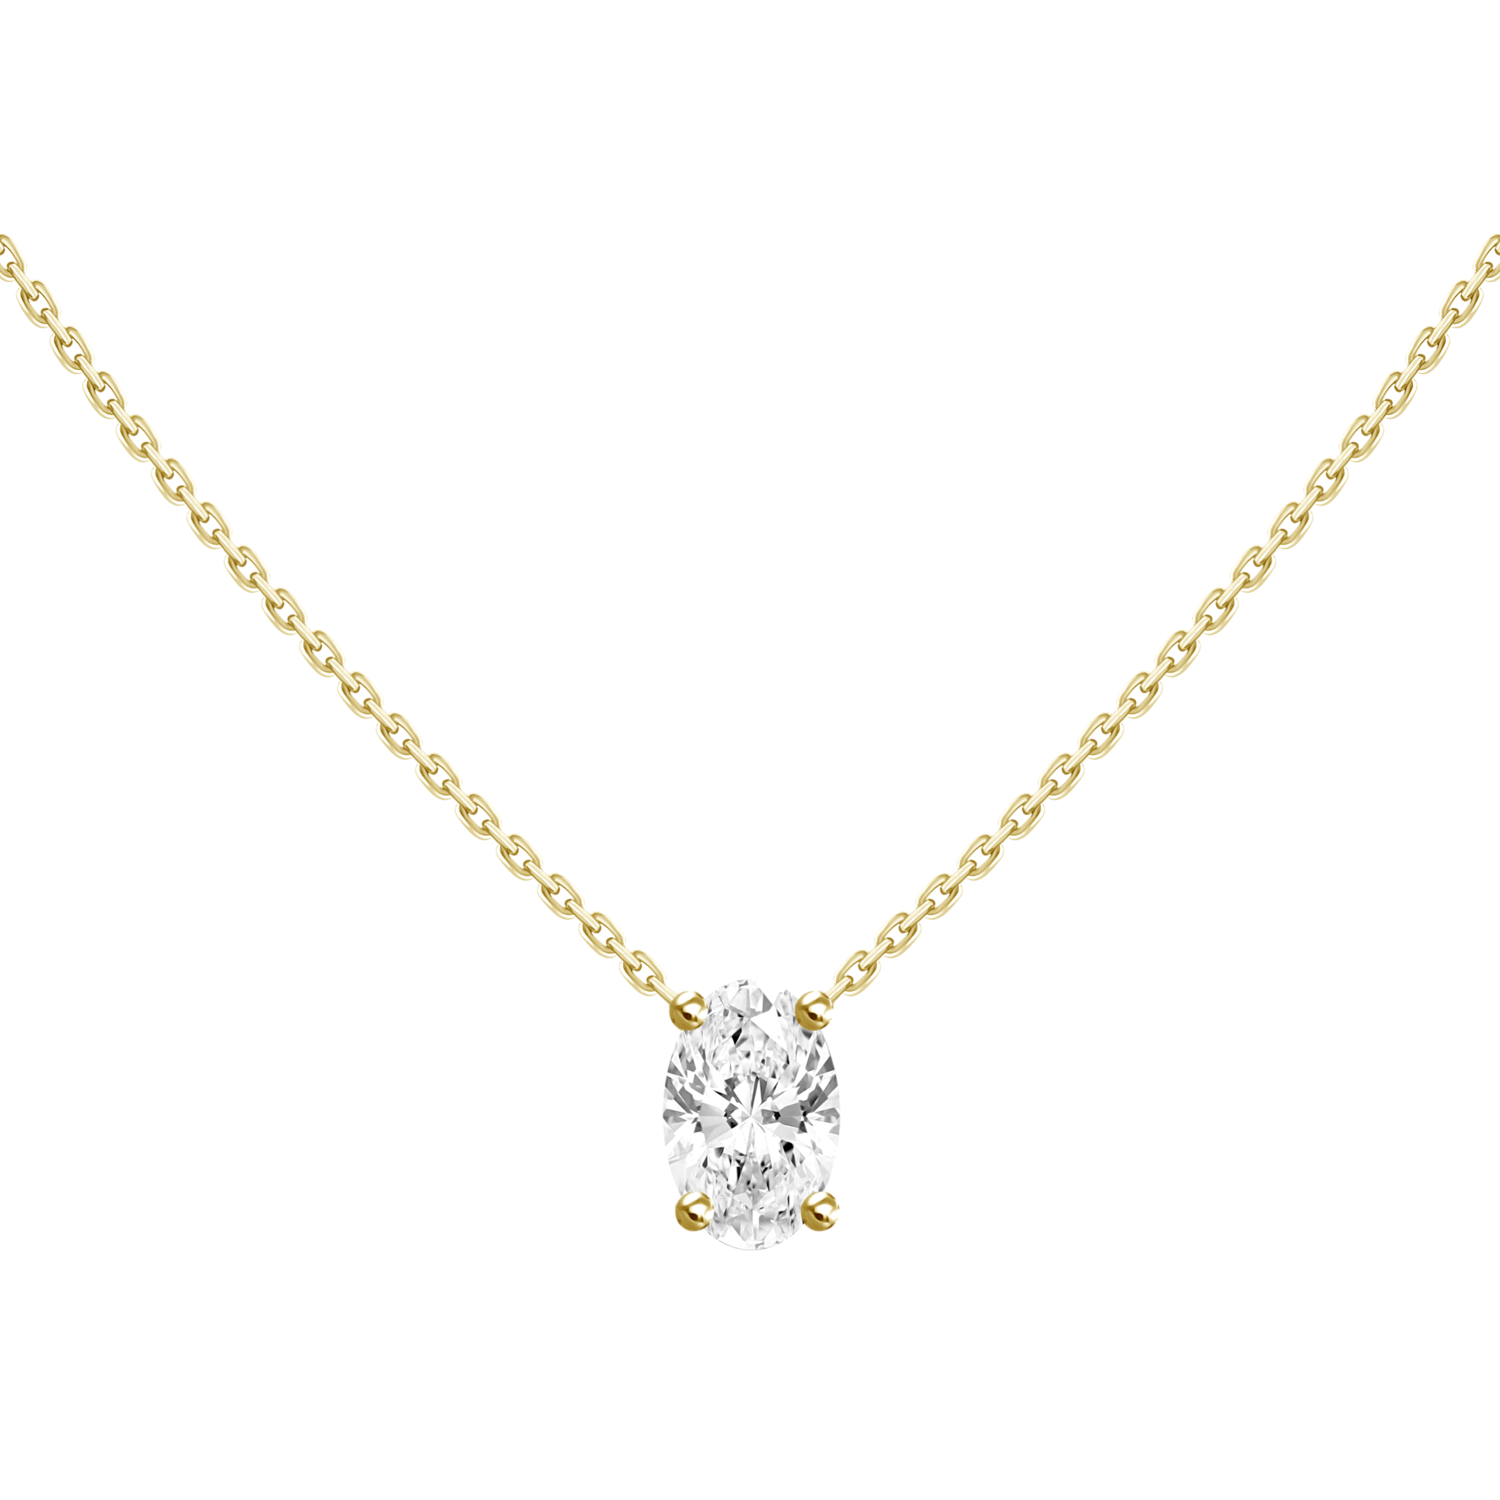 Radiant Heart & Floating Stone Pendant Collier Necklace | JMR Jewelers |  Cooper City, FL